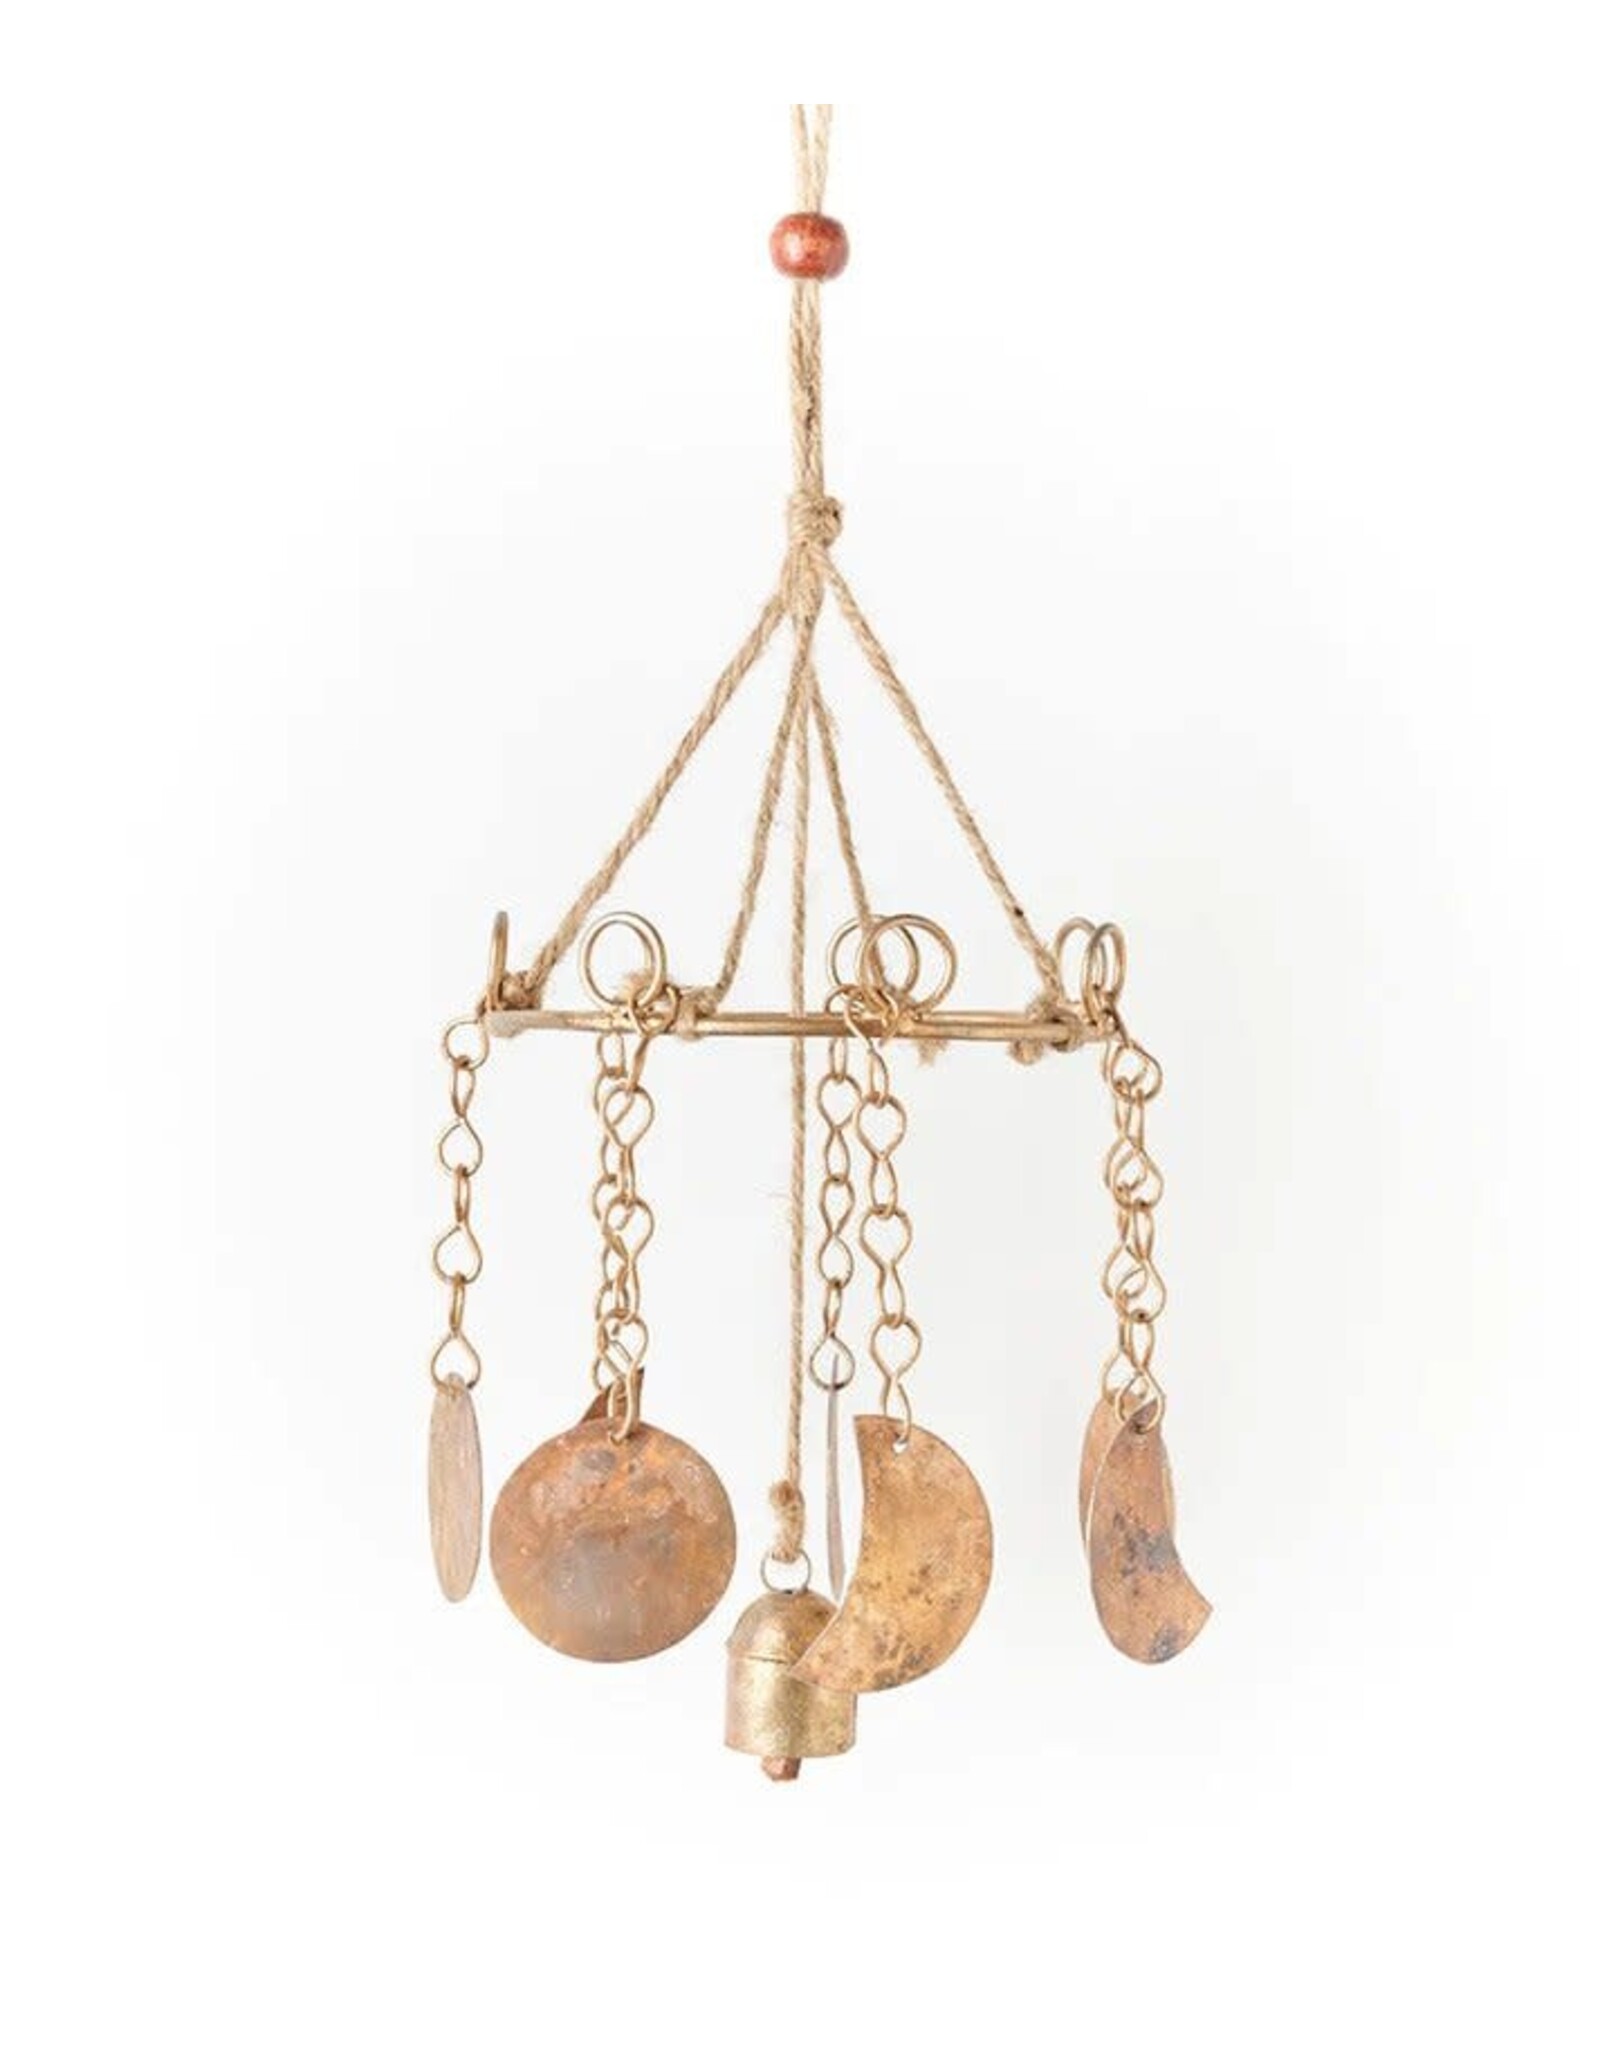 Trade roots Indukala Moon Mobile Chime